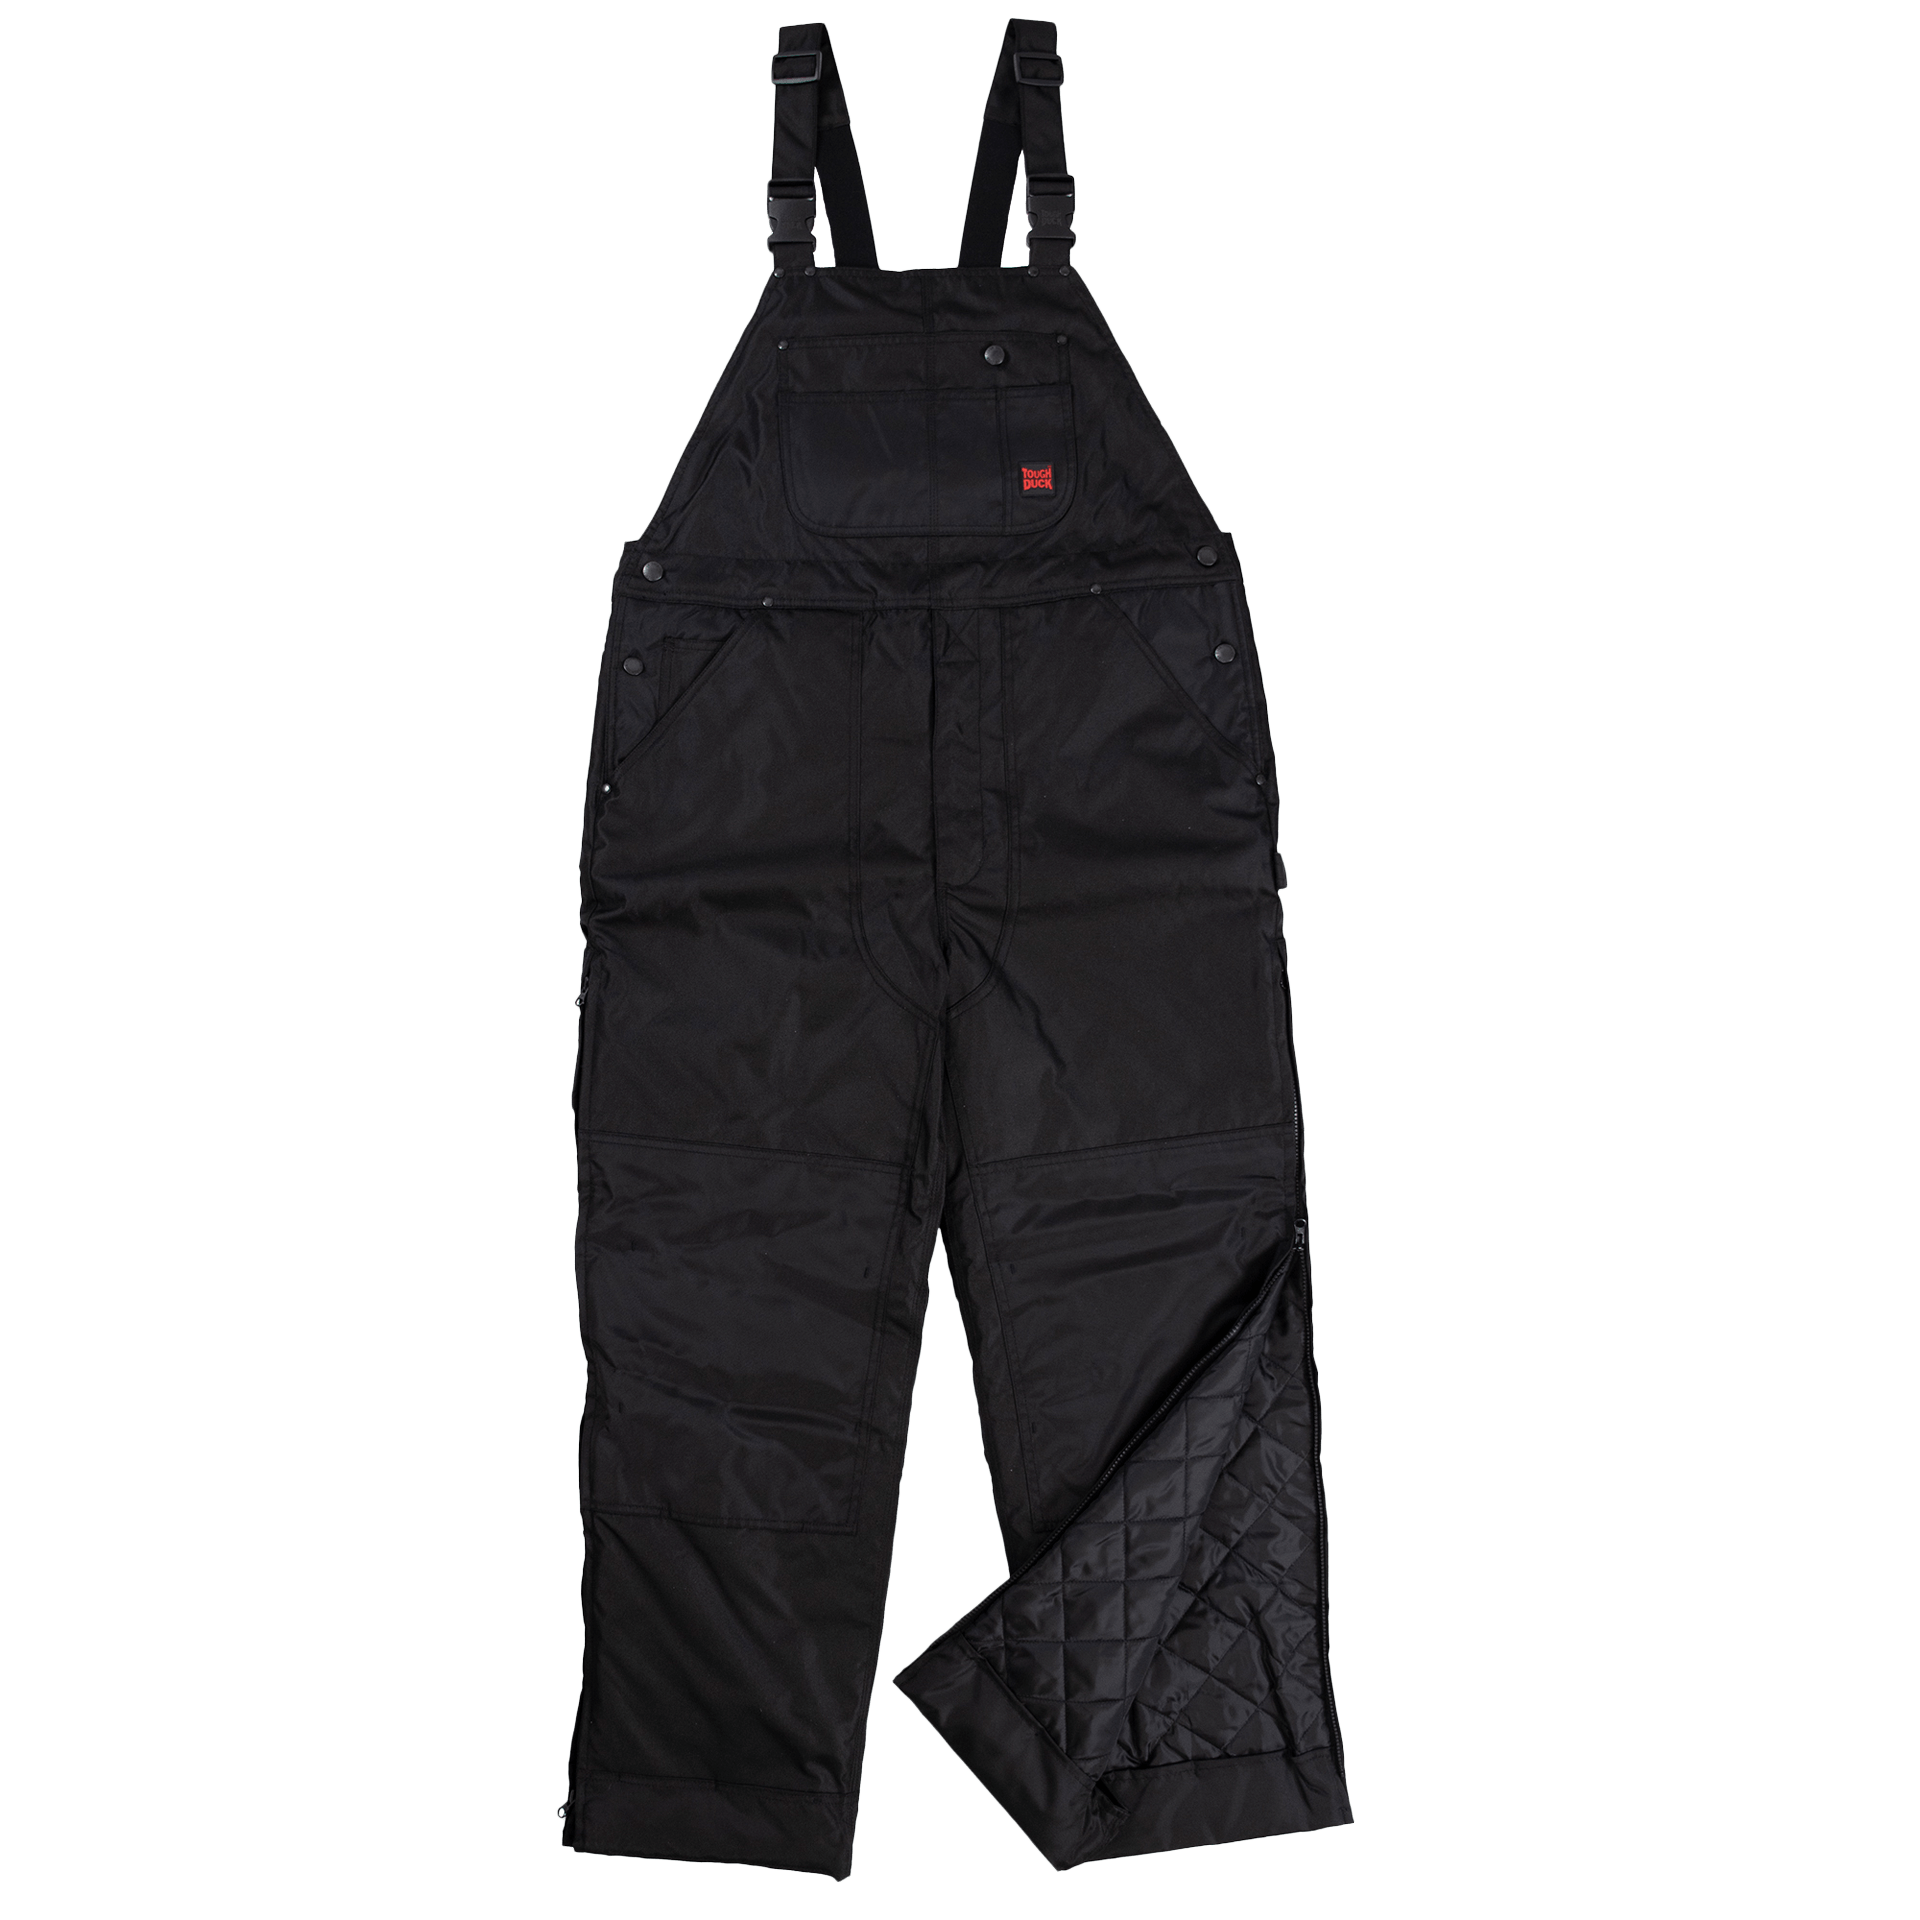 Tough Duck 7910 Insulated Waterproof Poly Oxford Bib Overalls | Black | Limited Size Selection Work Wear - Cleanflow